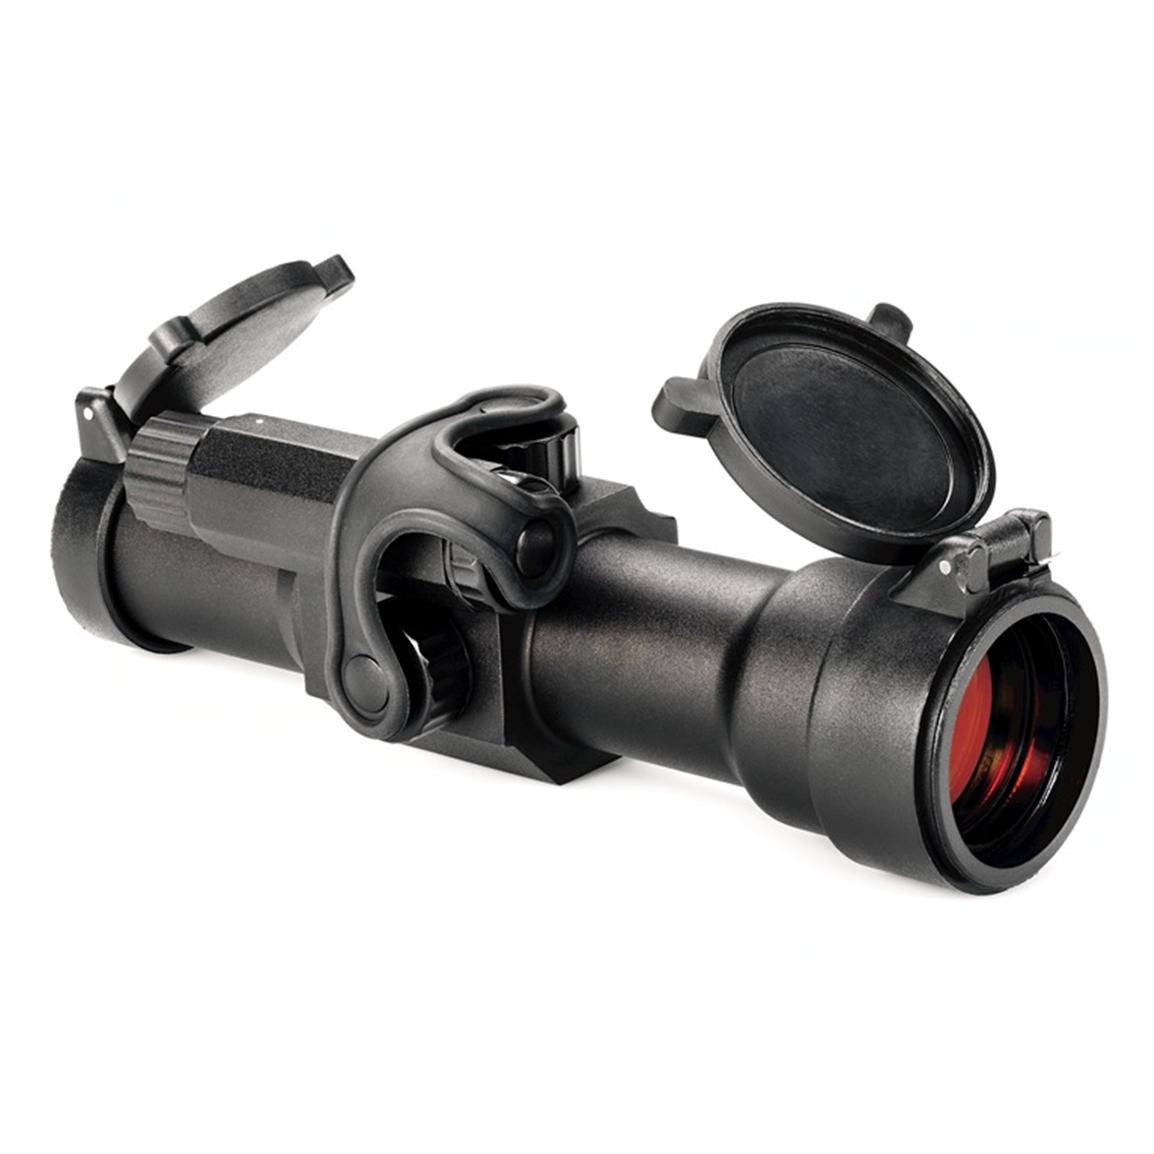 Tasco® Propoint 1x30mm 5 Moa Red Dot Rifle Scope 210116 Red Dot